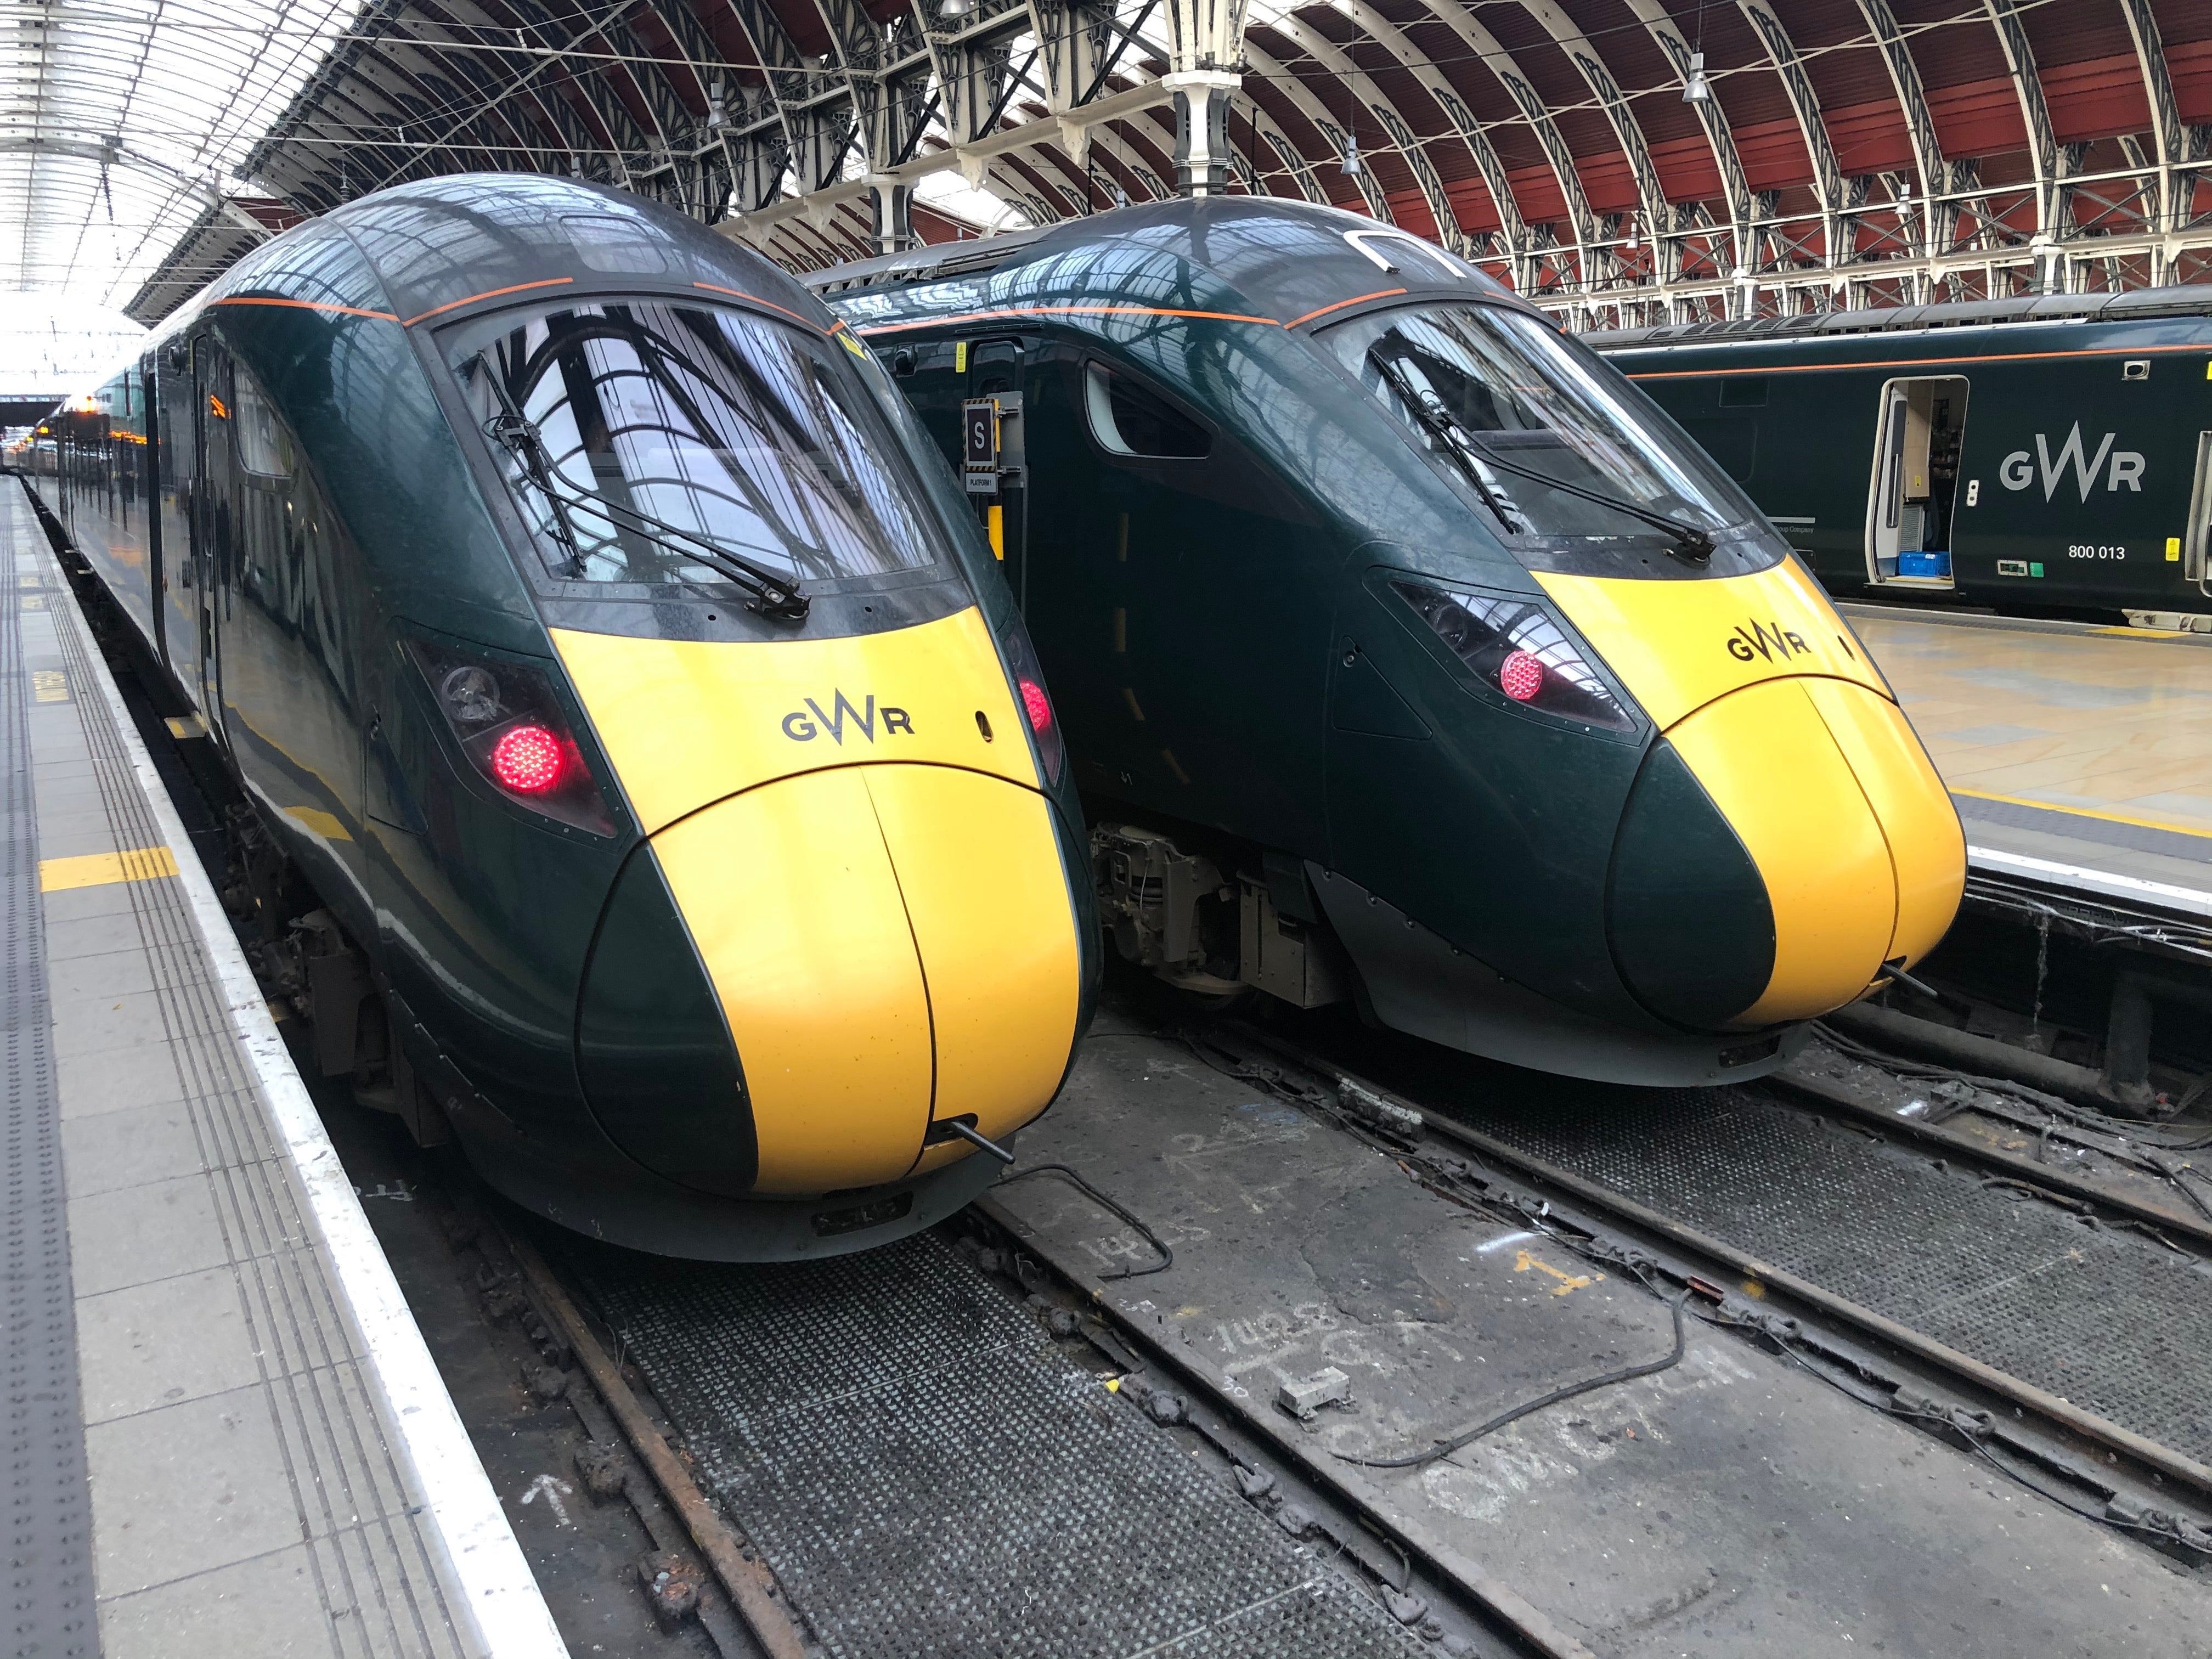 Grant Shapps is changing the guard, with Great British Railways set to oversee these trains and more like them